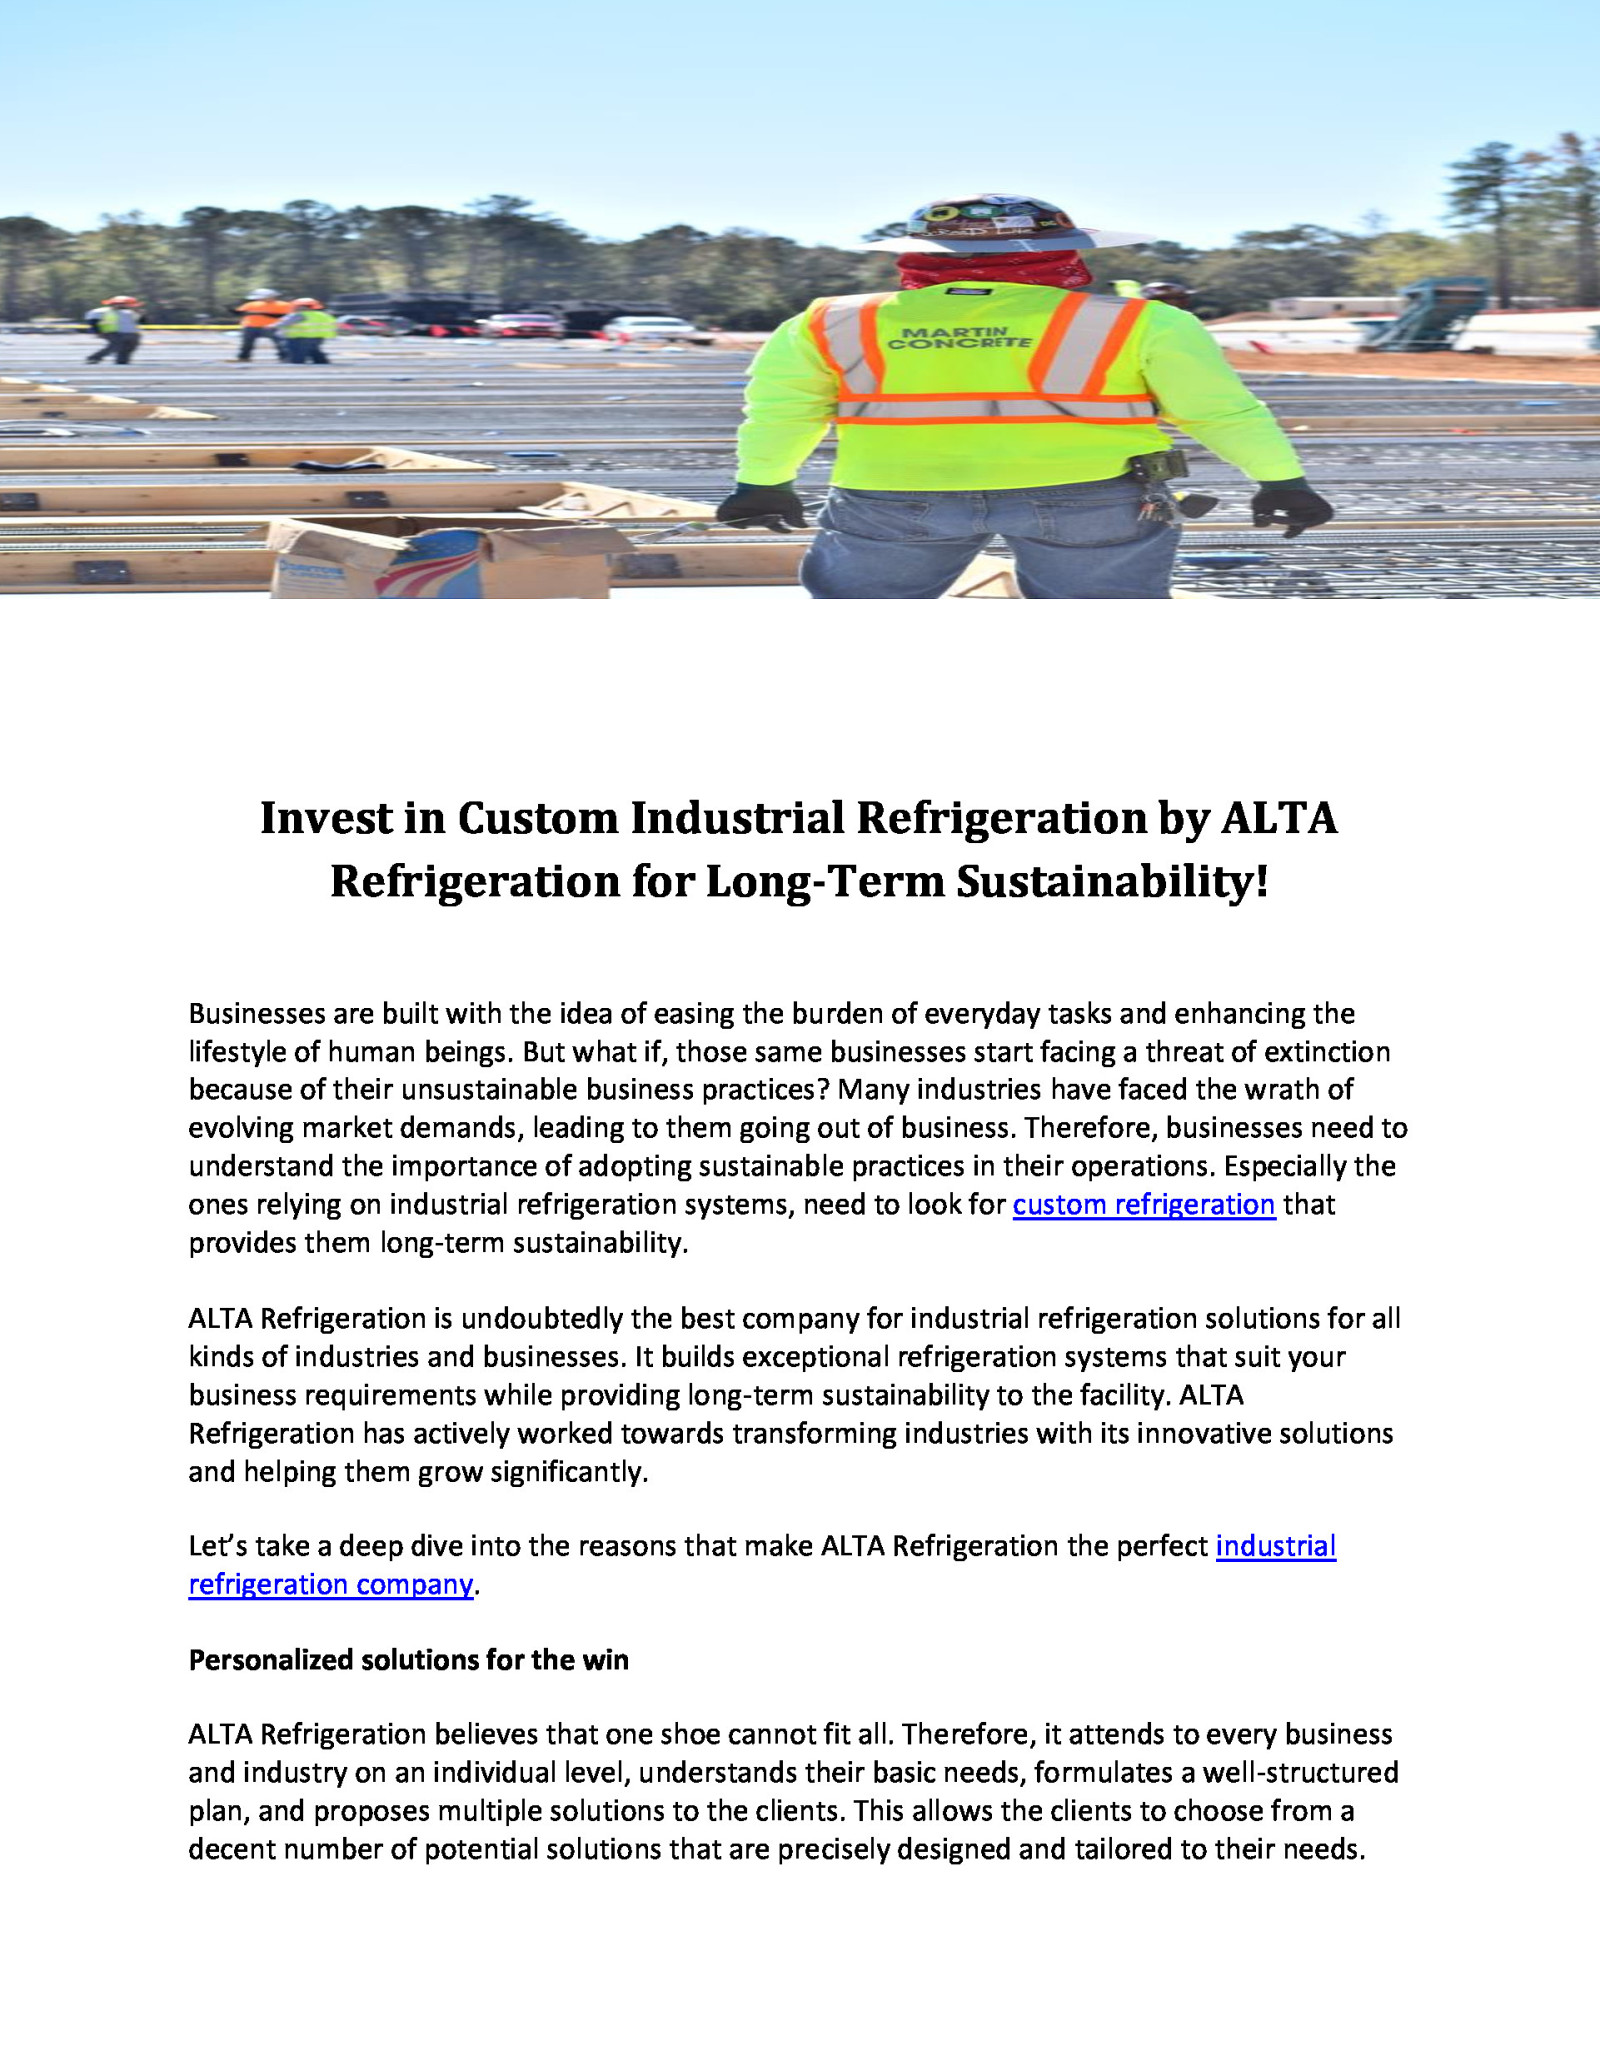 Invest in Custom Industrial Refrigeration by ALTA Refrigeration for Long-Term Sustainability!